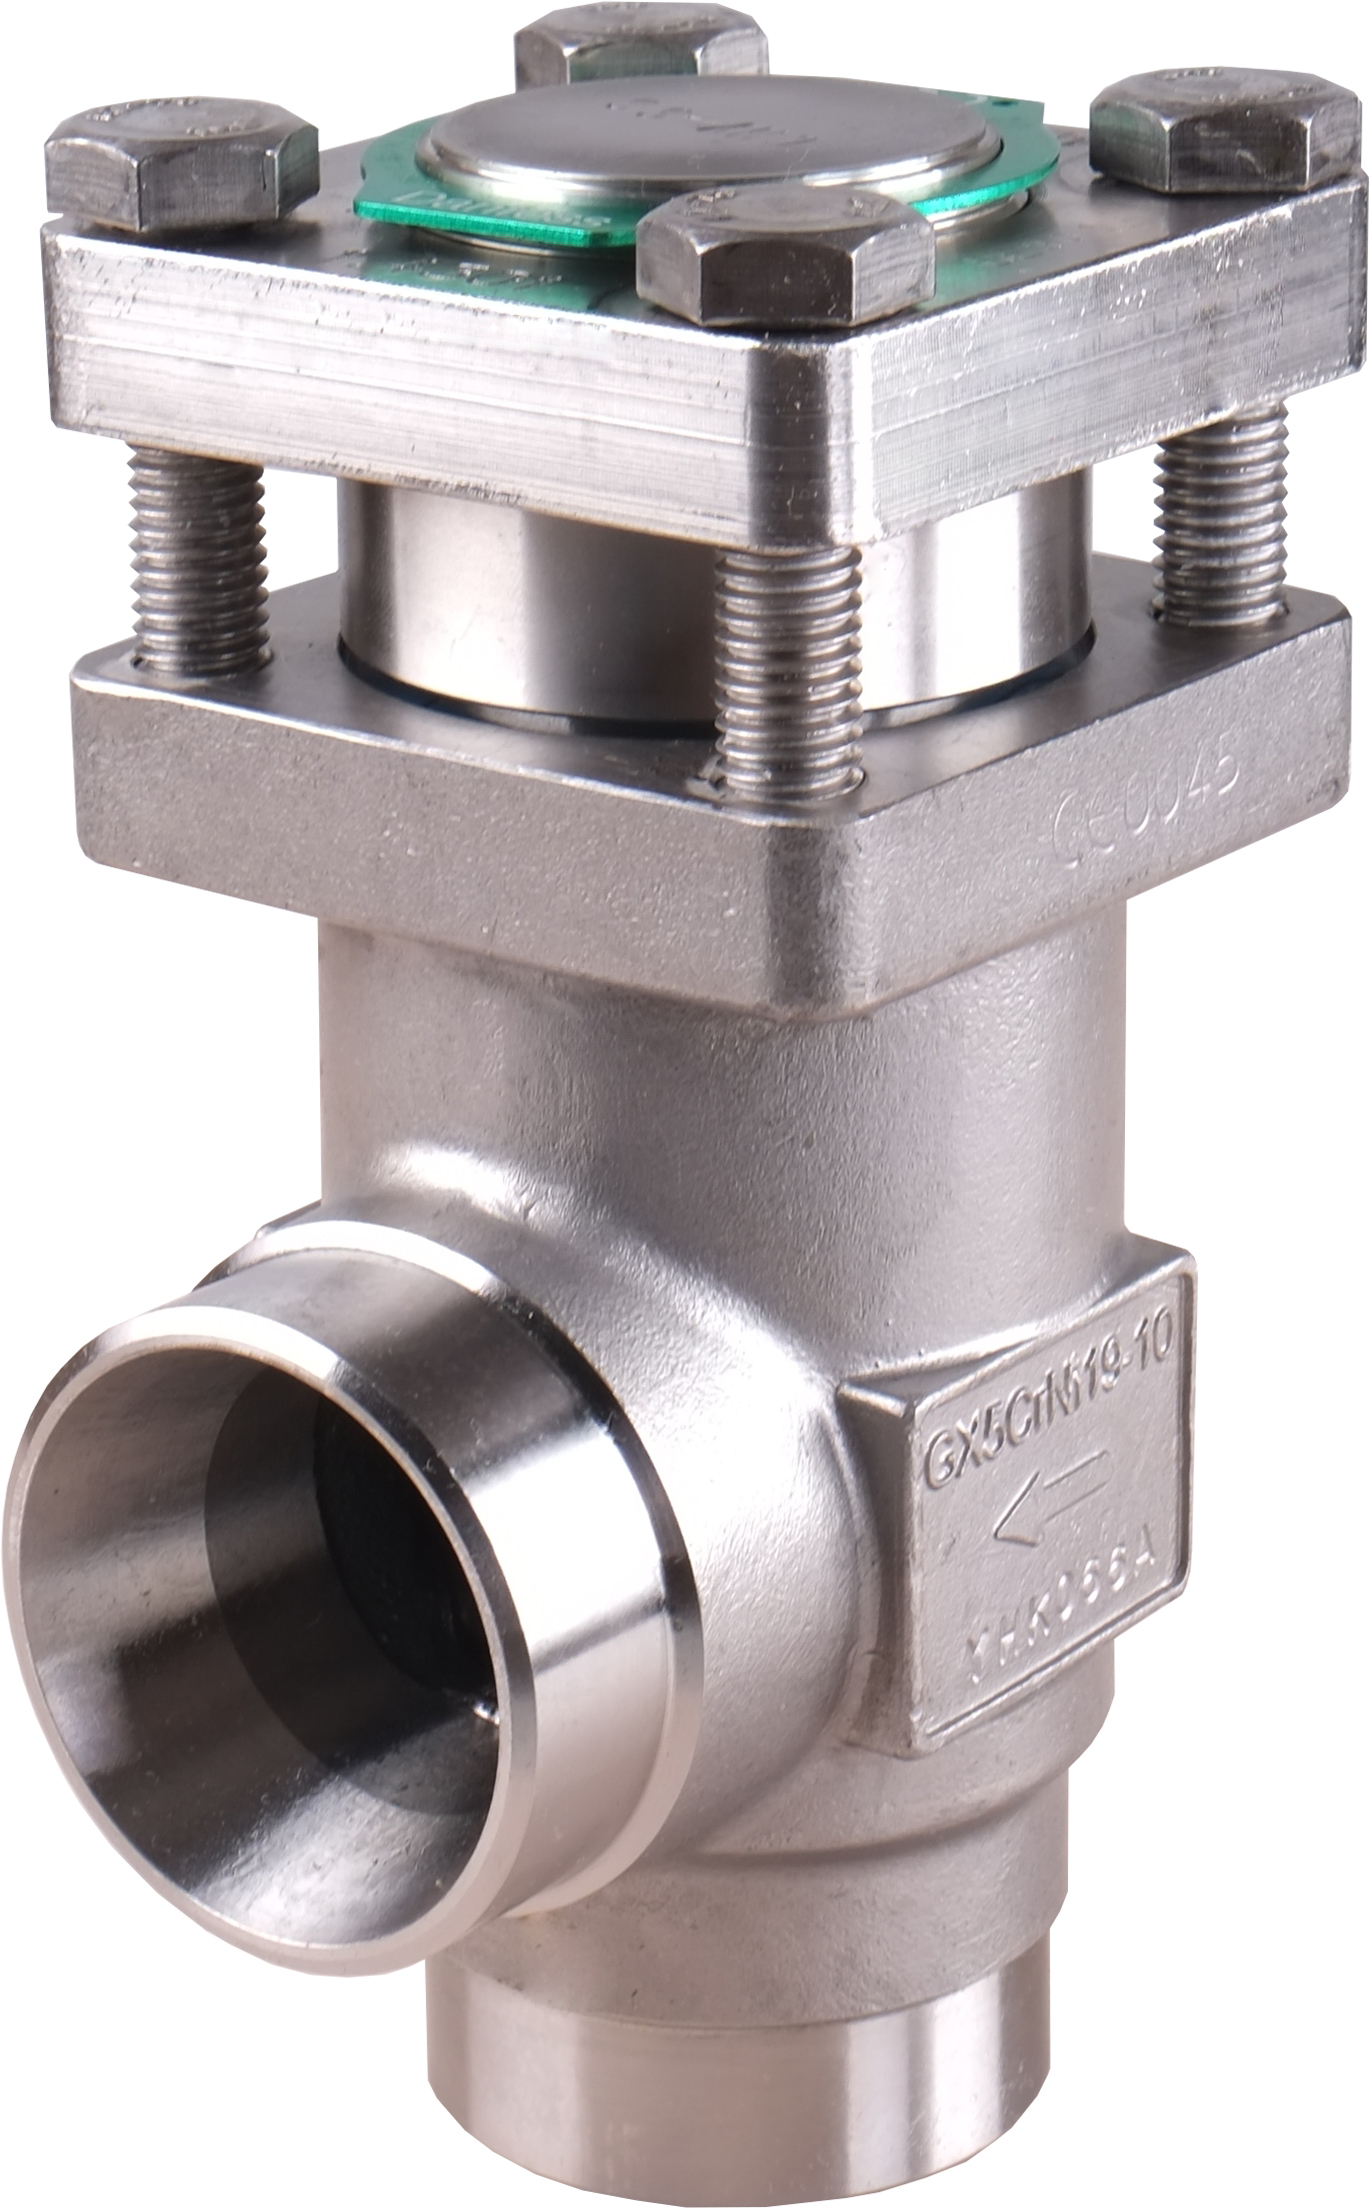 Check valve, CHV-X SS 40, Direction: Angleway, Connection standard: EN 10220